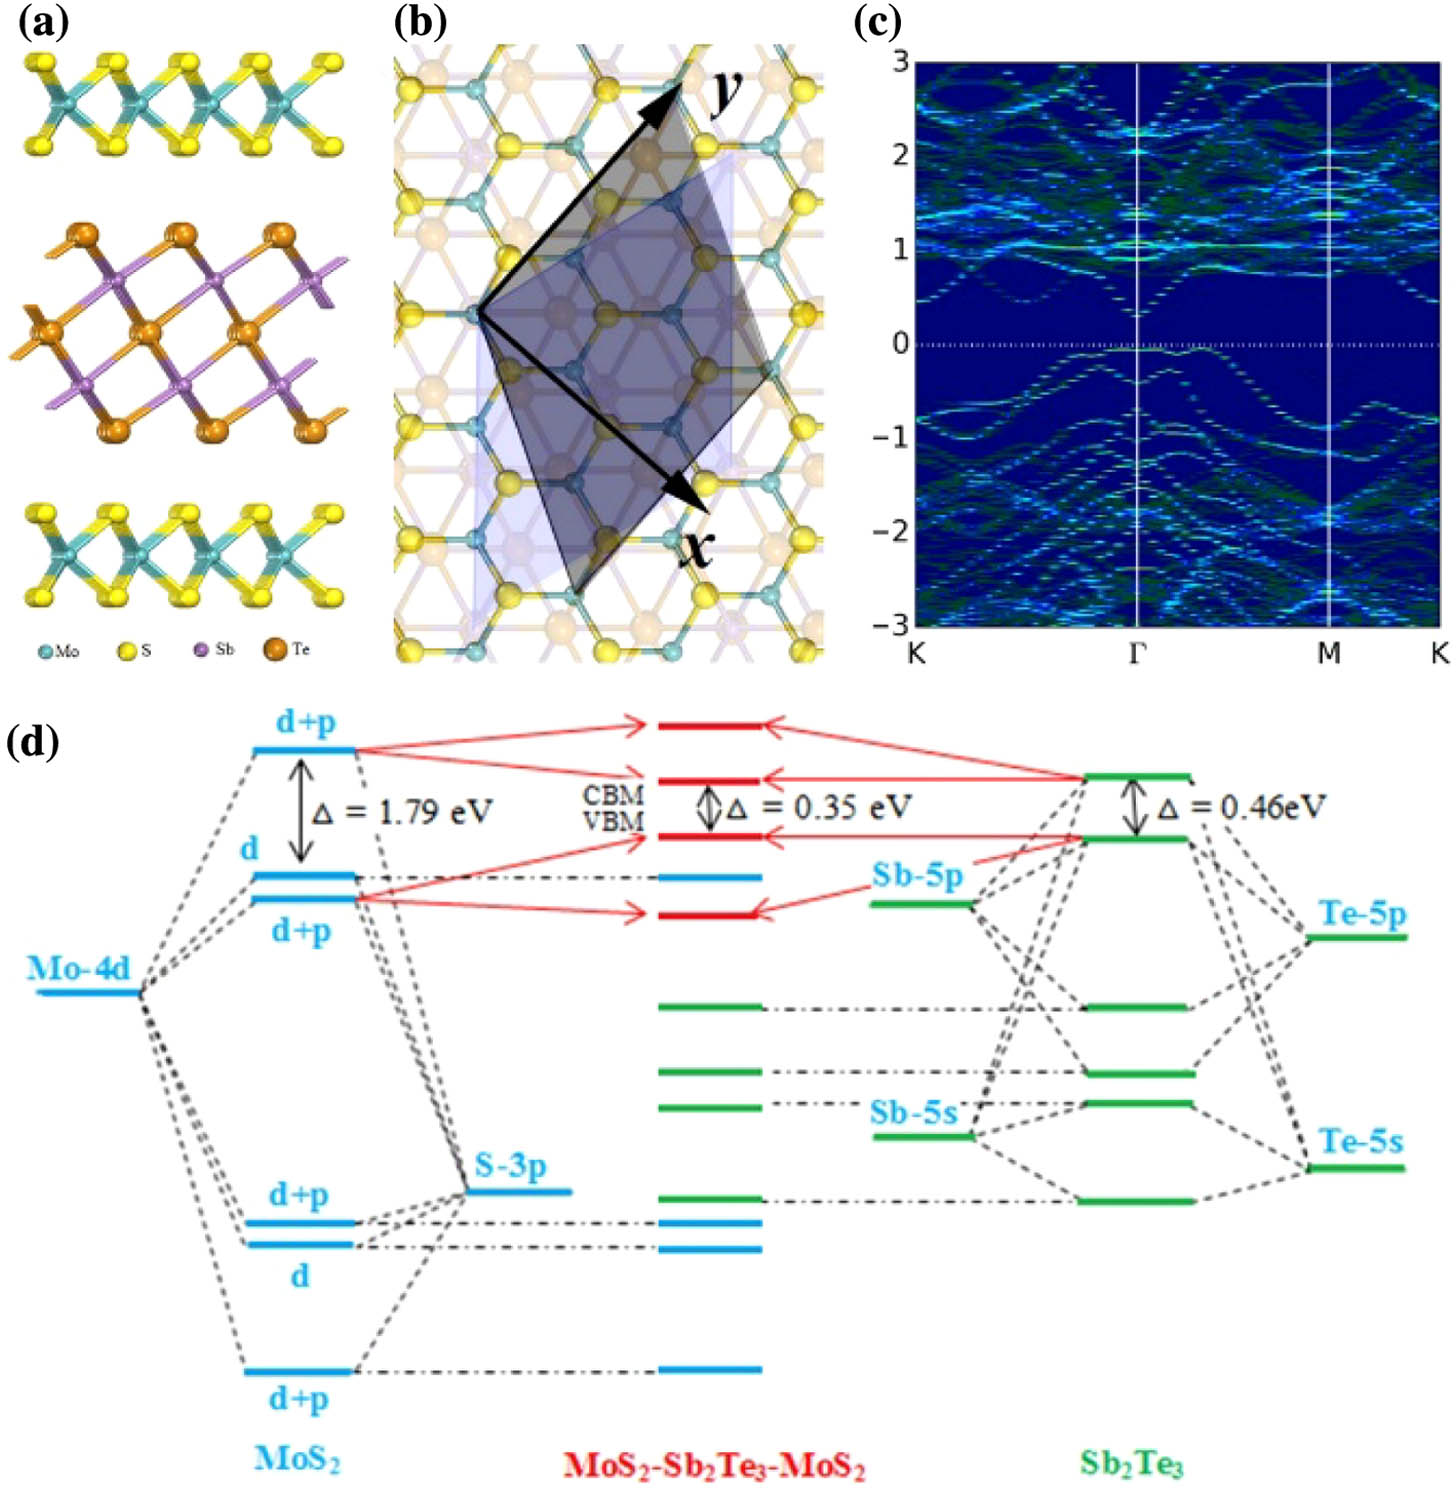 Atomic and electronic structures of the MoS2-Sb2Te3-MoS2 heterostructure. (a) Side and (b) top views of the MoS2-Sb2Te3-MoS2 heterostructure. In (b), the detailed matching pattern of the (7×7)/(2×2)MoS2-Sb2Te3-MoS2 heterostructure is shown. The (7×7)MoS2 supercell is highlighted with yellow color, and the (2×2)Sb2Te supercell is denoted by the blue area. (c) Unfolding band structure of the MoS2-Sb2Te3-MoS2 heterostructure. Here, the Fermi level is defined as zero. (d) Band alignment of the MoS2-Sb2Te3-MoS2 heterostructure. The corresponding energy levels of pure MoS2 and Sb2Te3 slabs are shown in both sides.